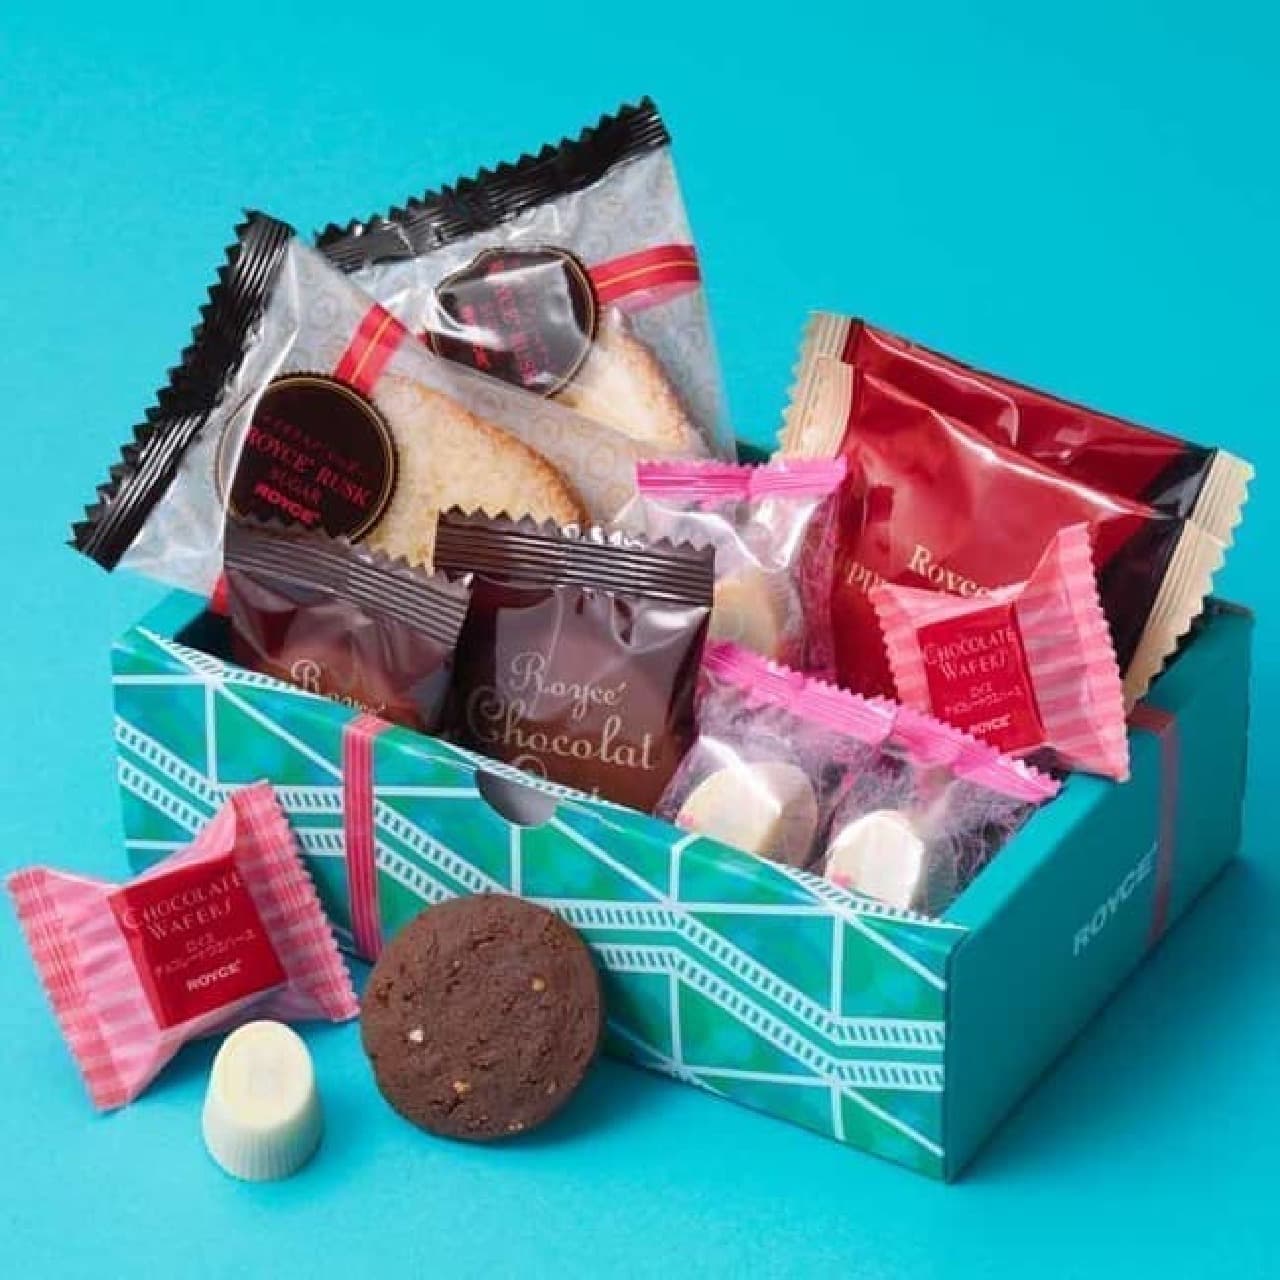 Lloyds Sweet Selection [13 pieces]